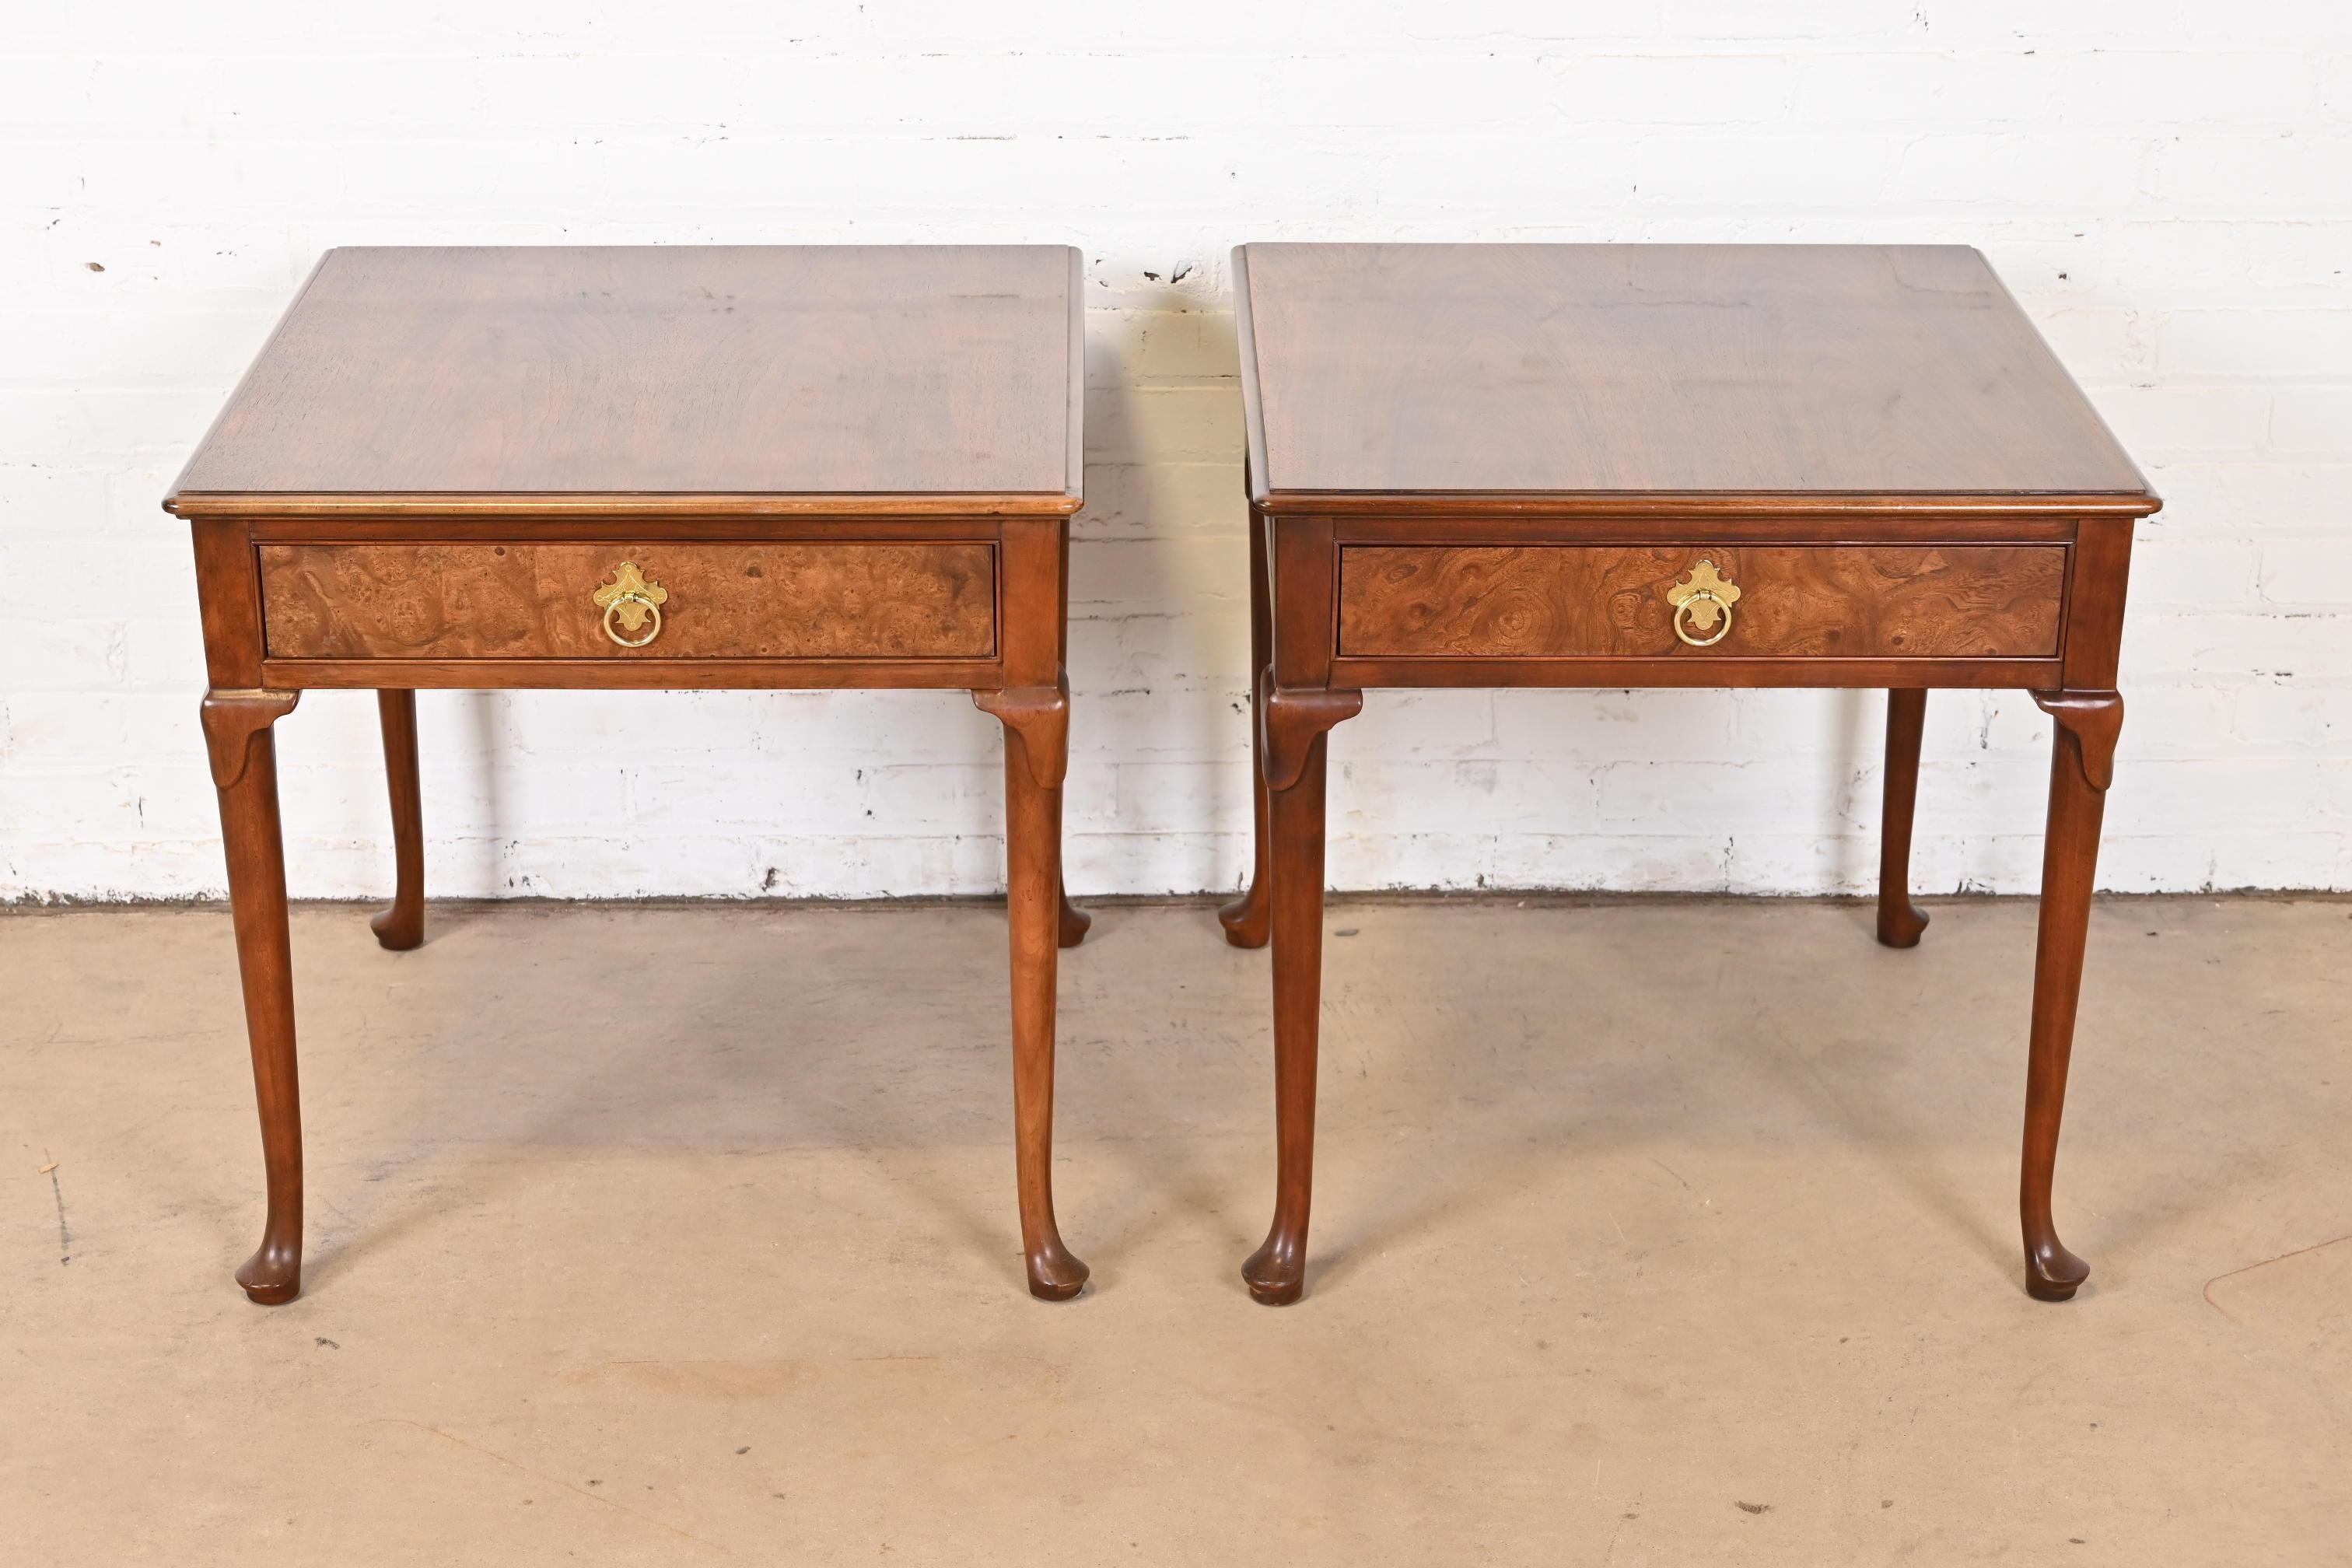 A gorgeous pair of Regency or Queen Anne style single drawer nightstands, tea tables, or occasional side tables

By Baker Furniture

USA, Circa 1980s

Book-matched walnut, with carved solid walnut legs, burl wood drawer fronts, and original brass